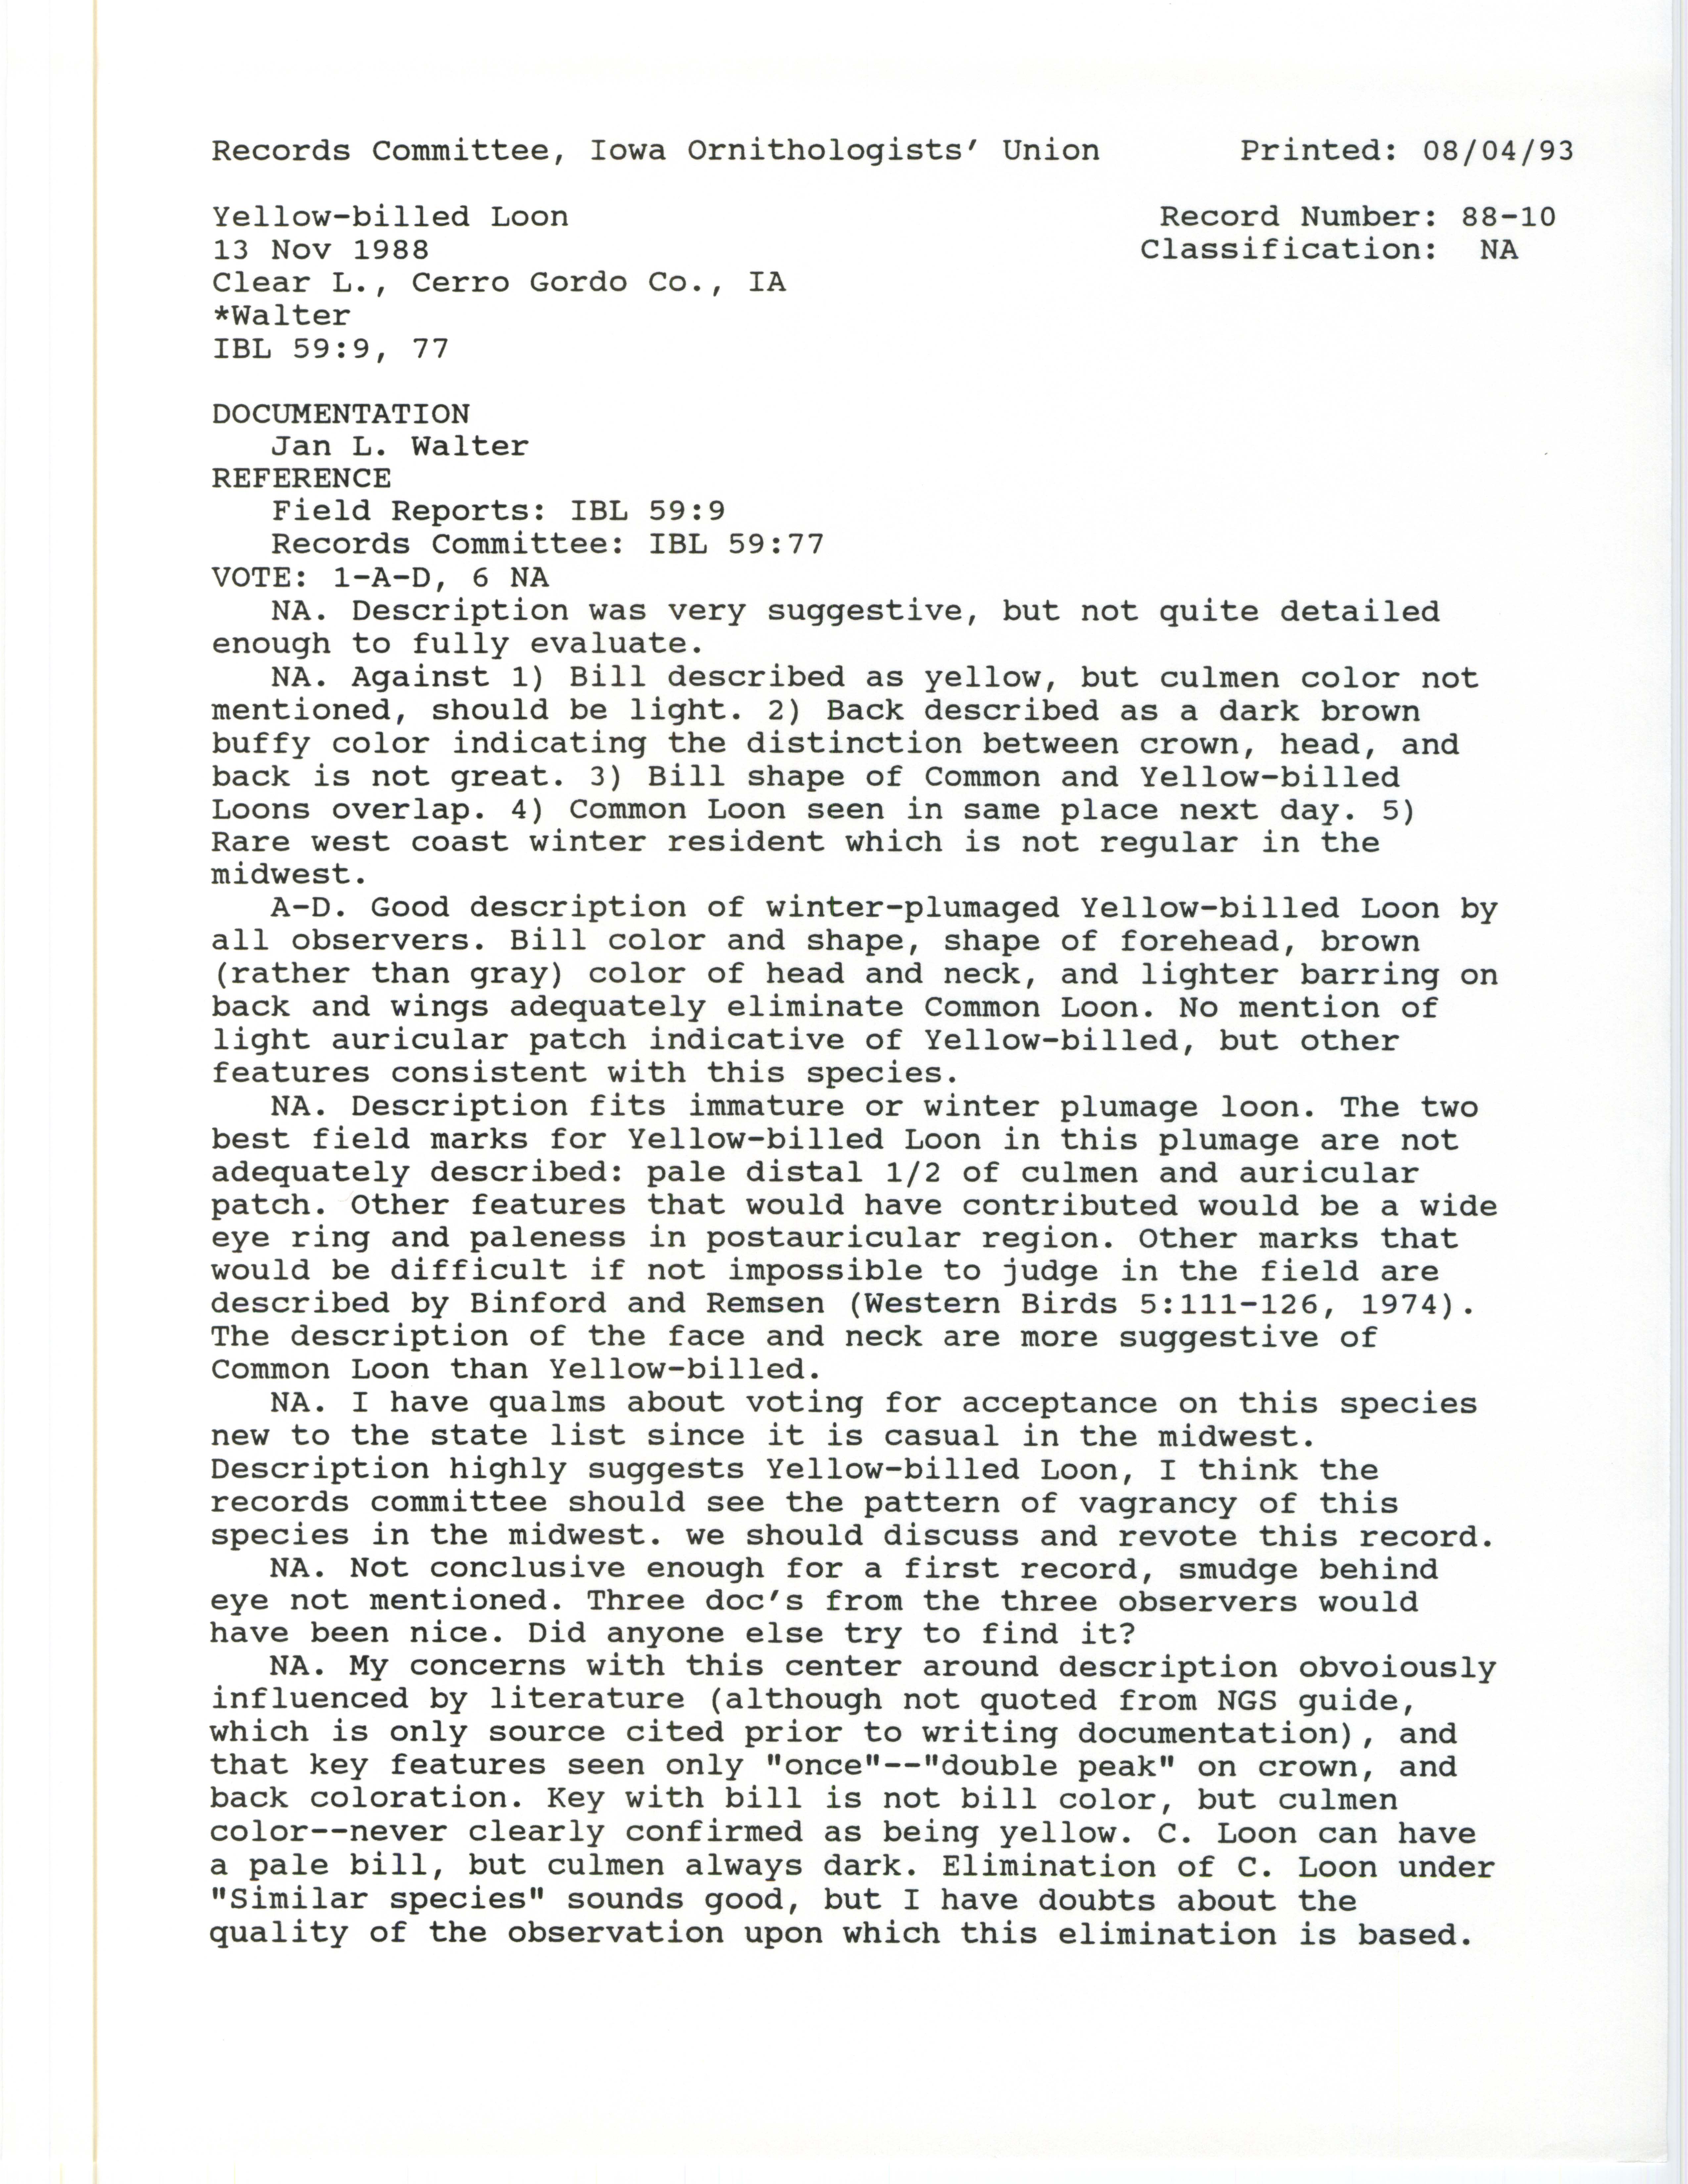 Record Committee review for rare bird sighting of Yellow-billed Loon at Clear Lake, 1988